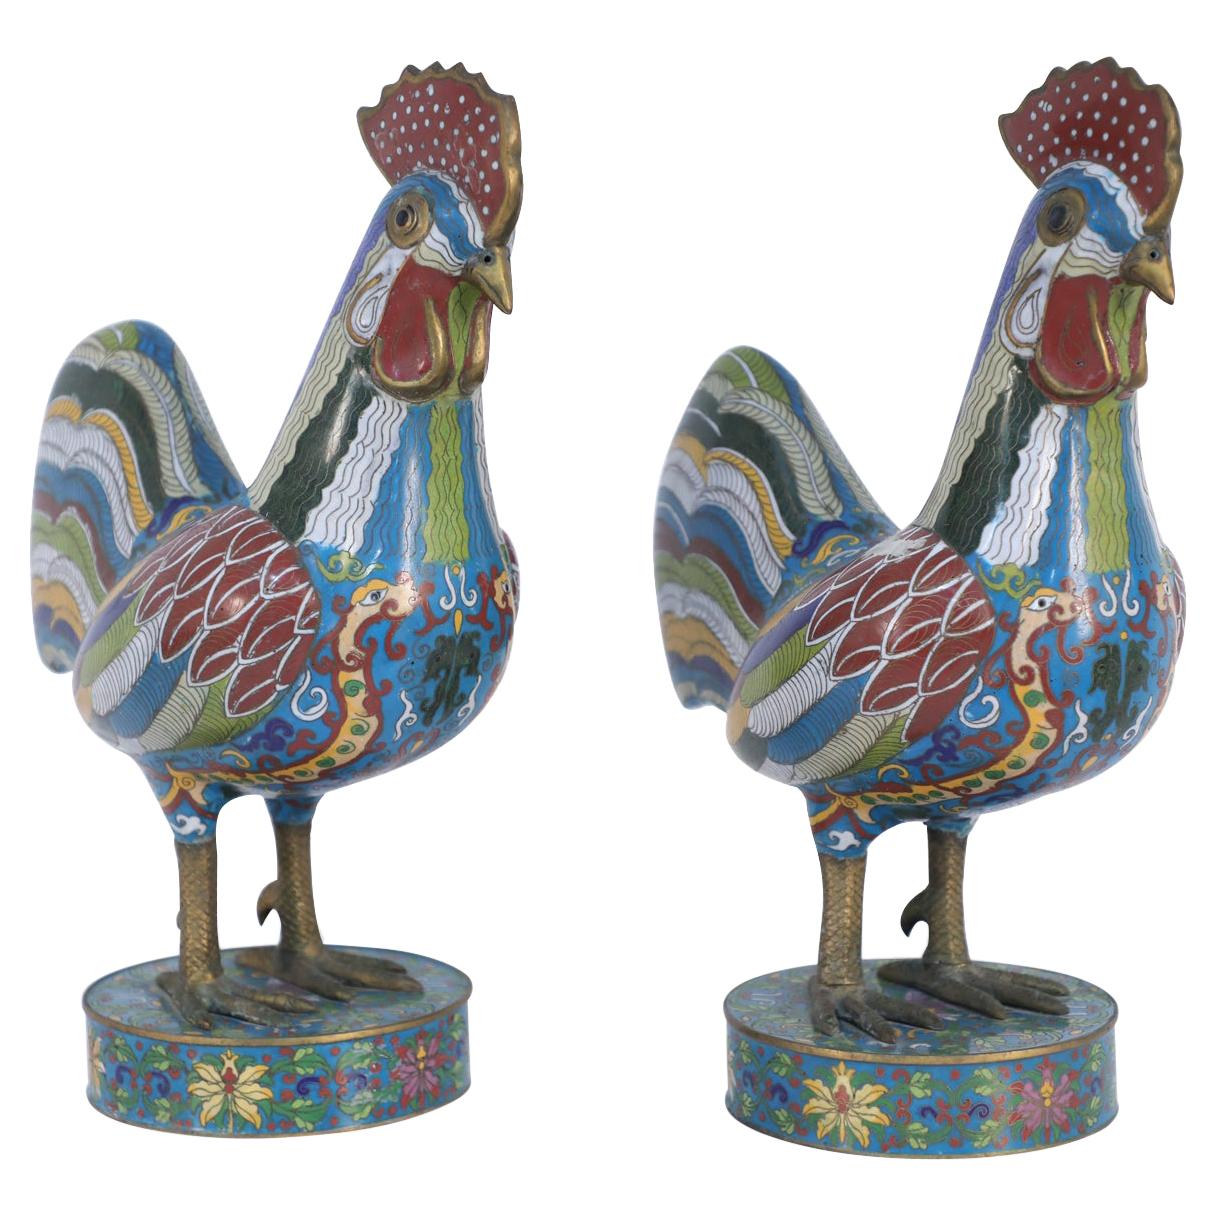 Pair of Early 20th Century Chinese Multi-Colored Cloisonne Rooster Sculptures